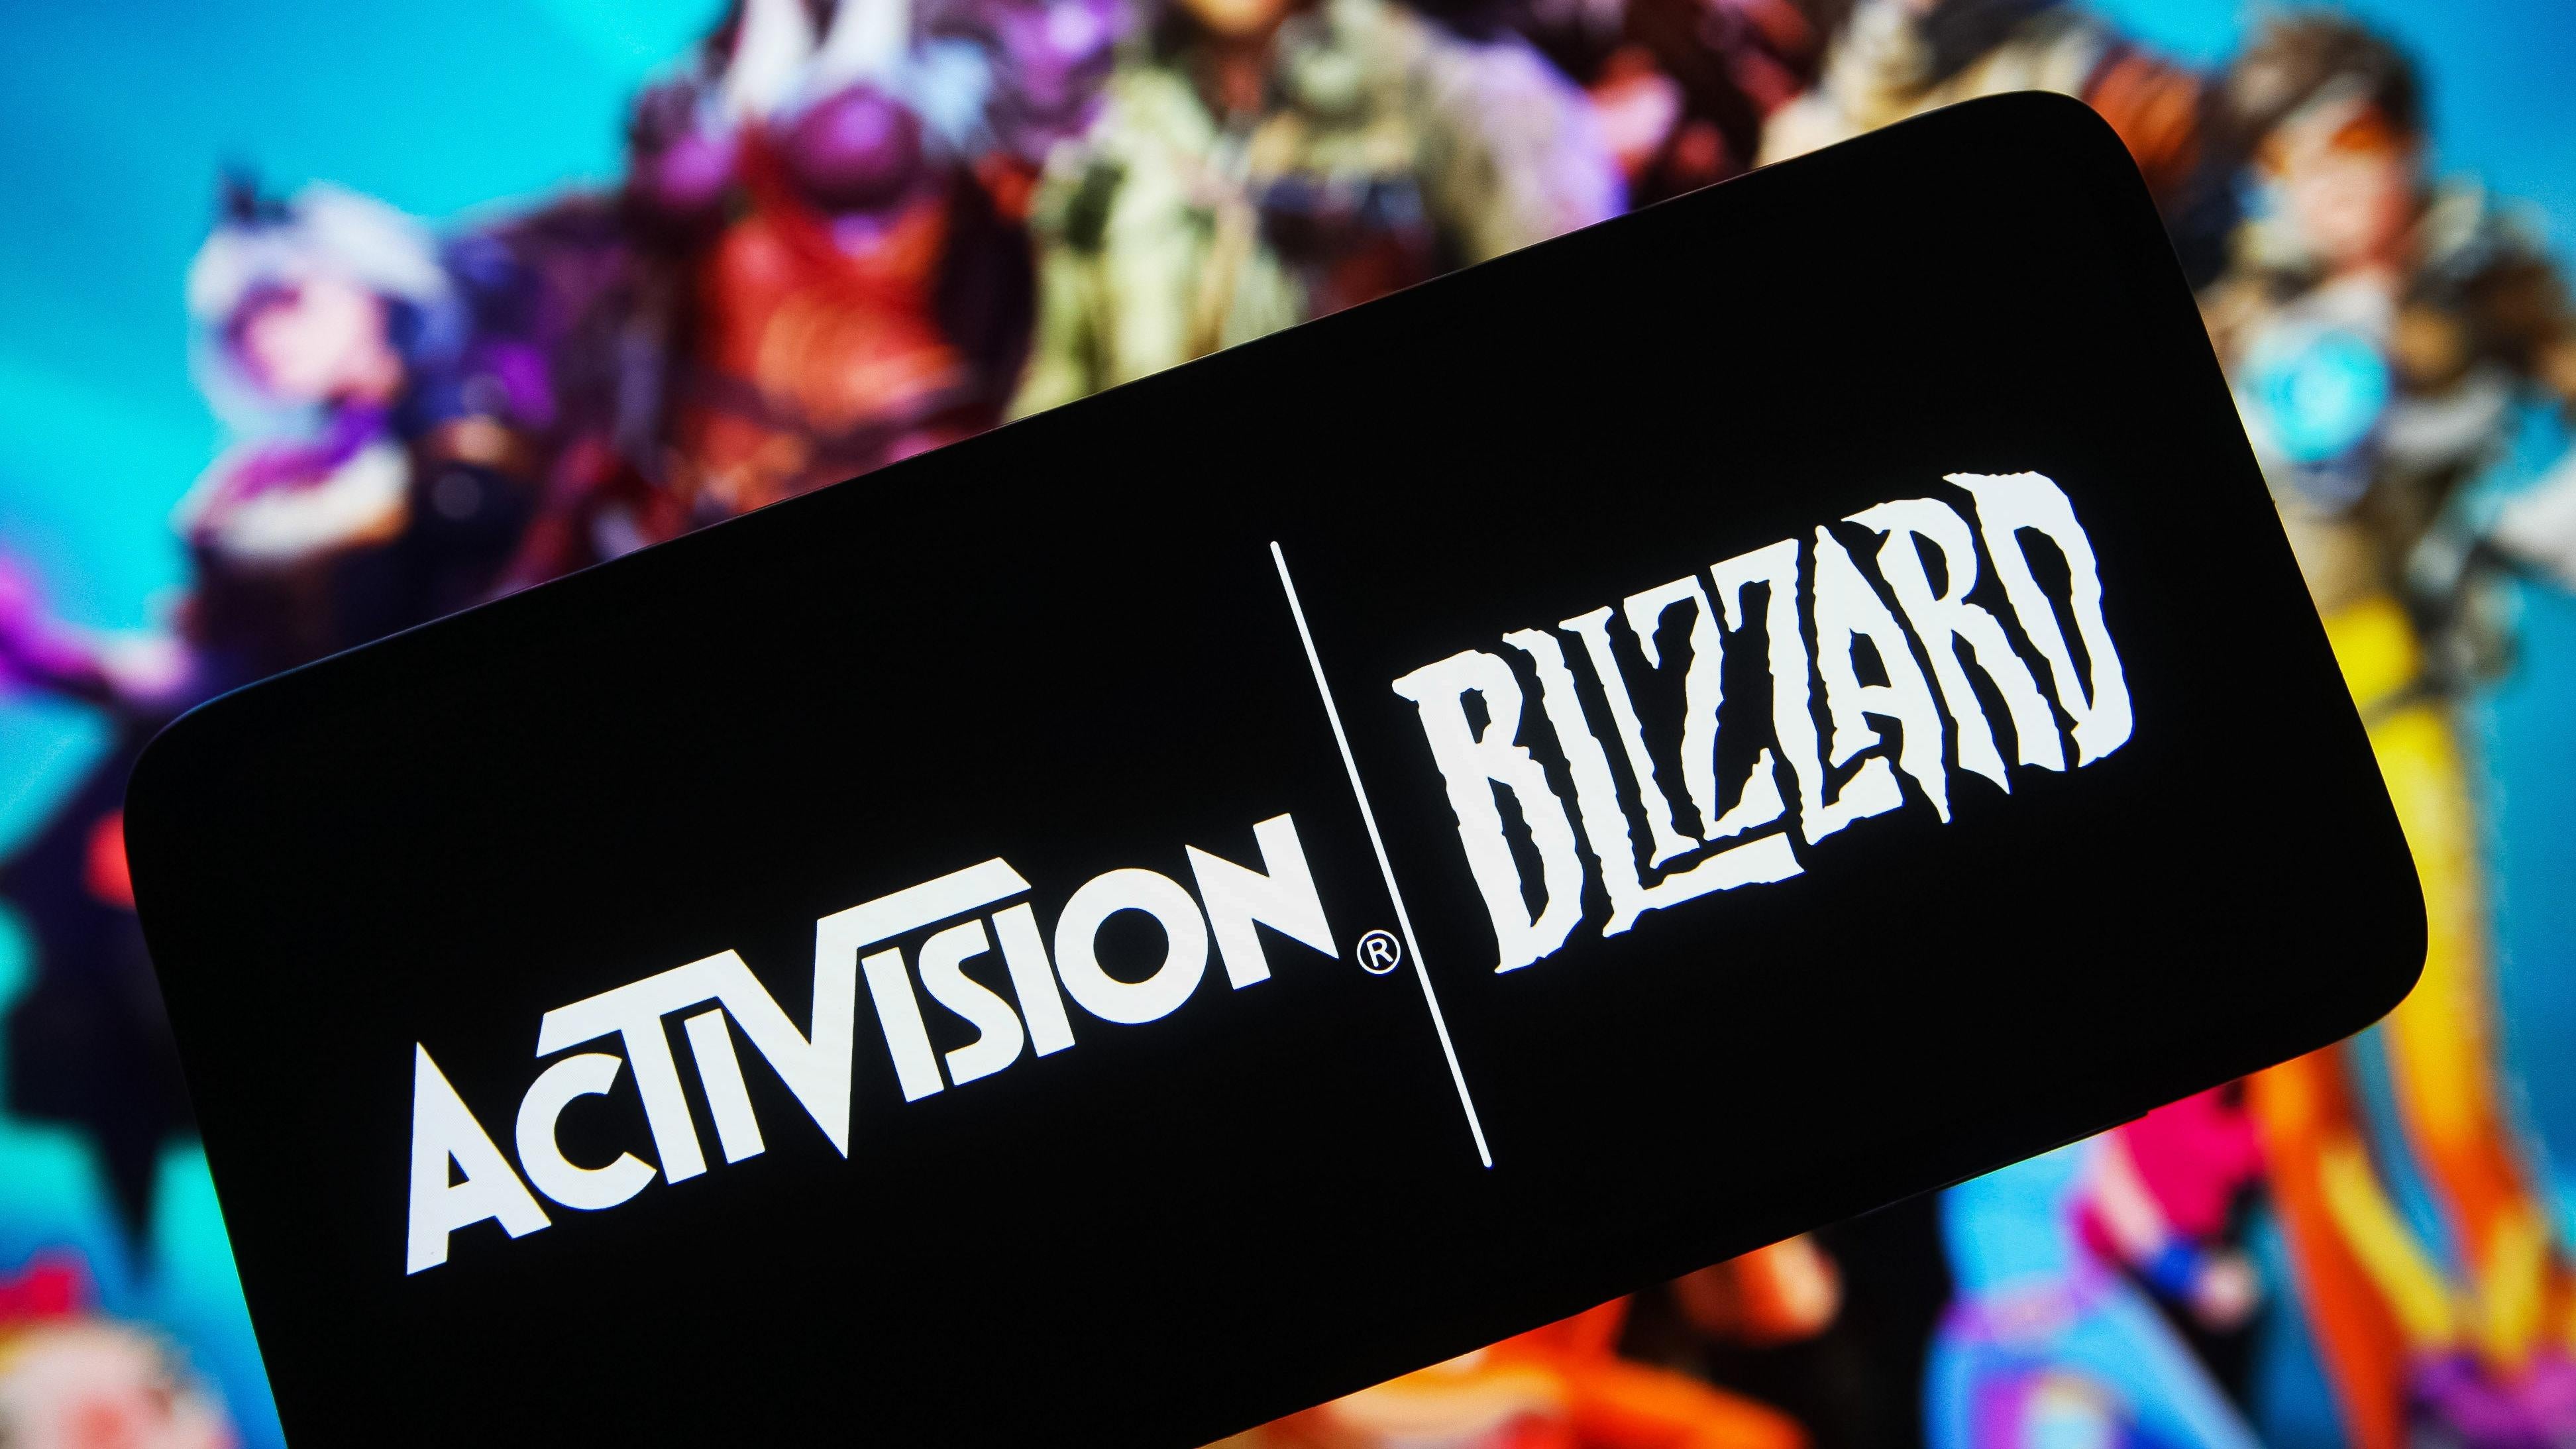 New lawsuit and new allegations levied against Activision Blizzard - OnMSFT.com - October 13, 2022